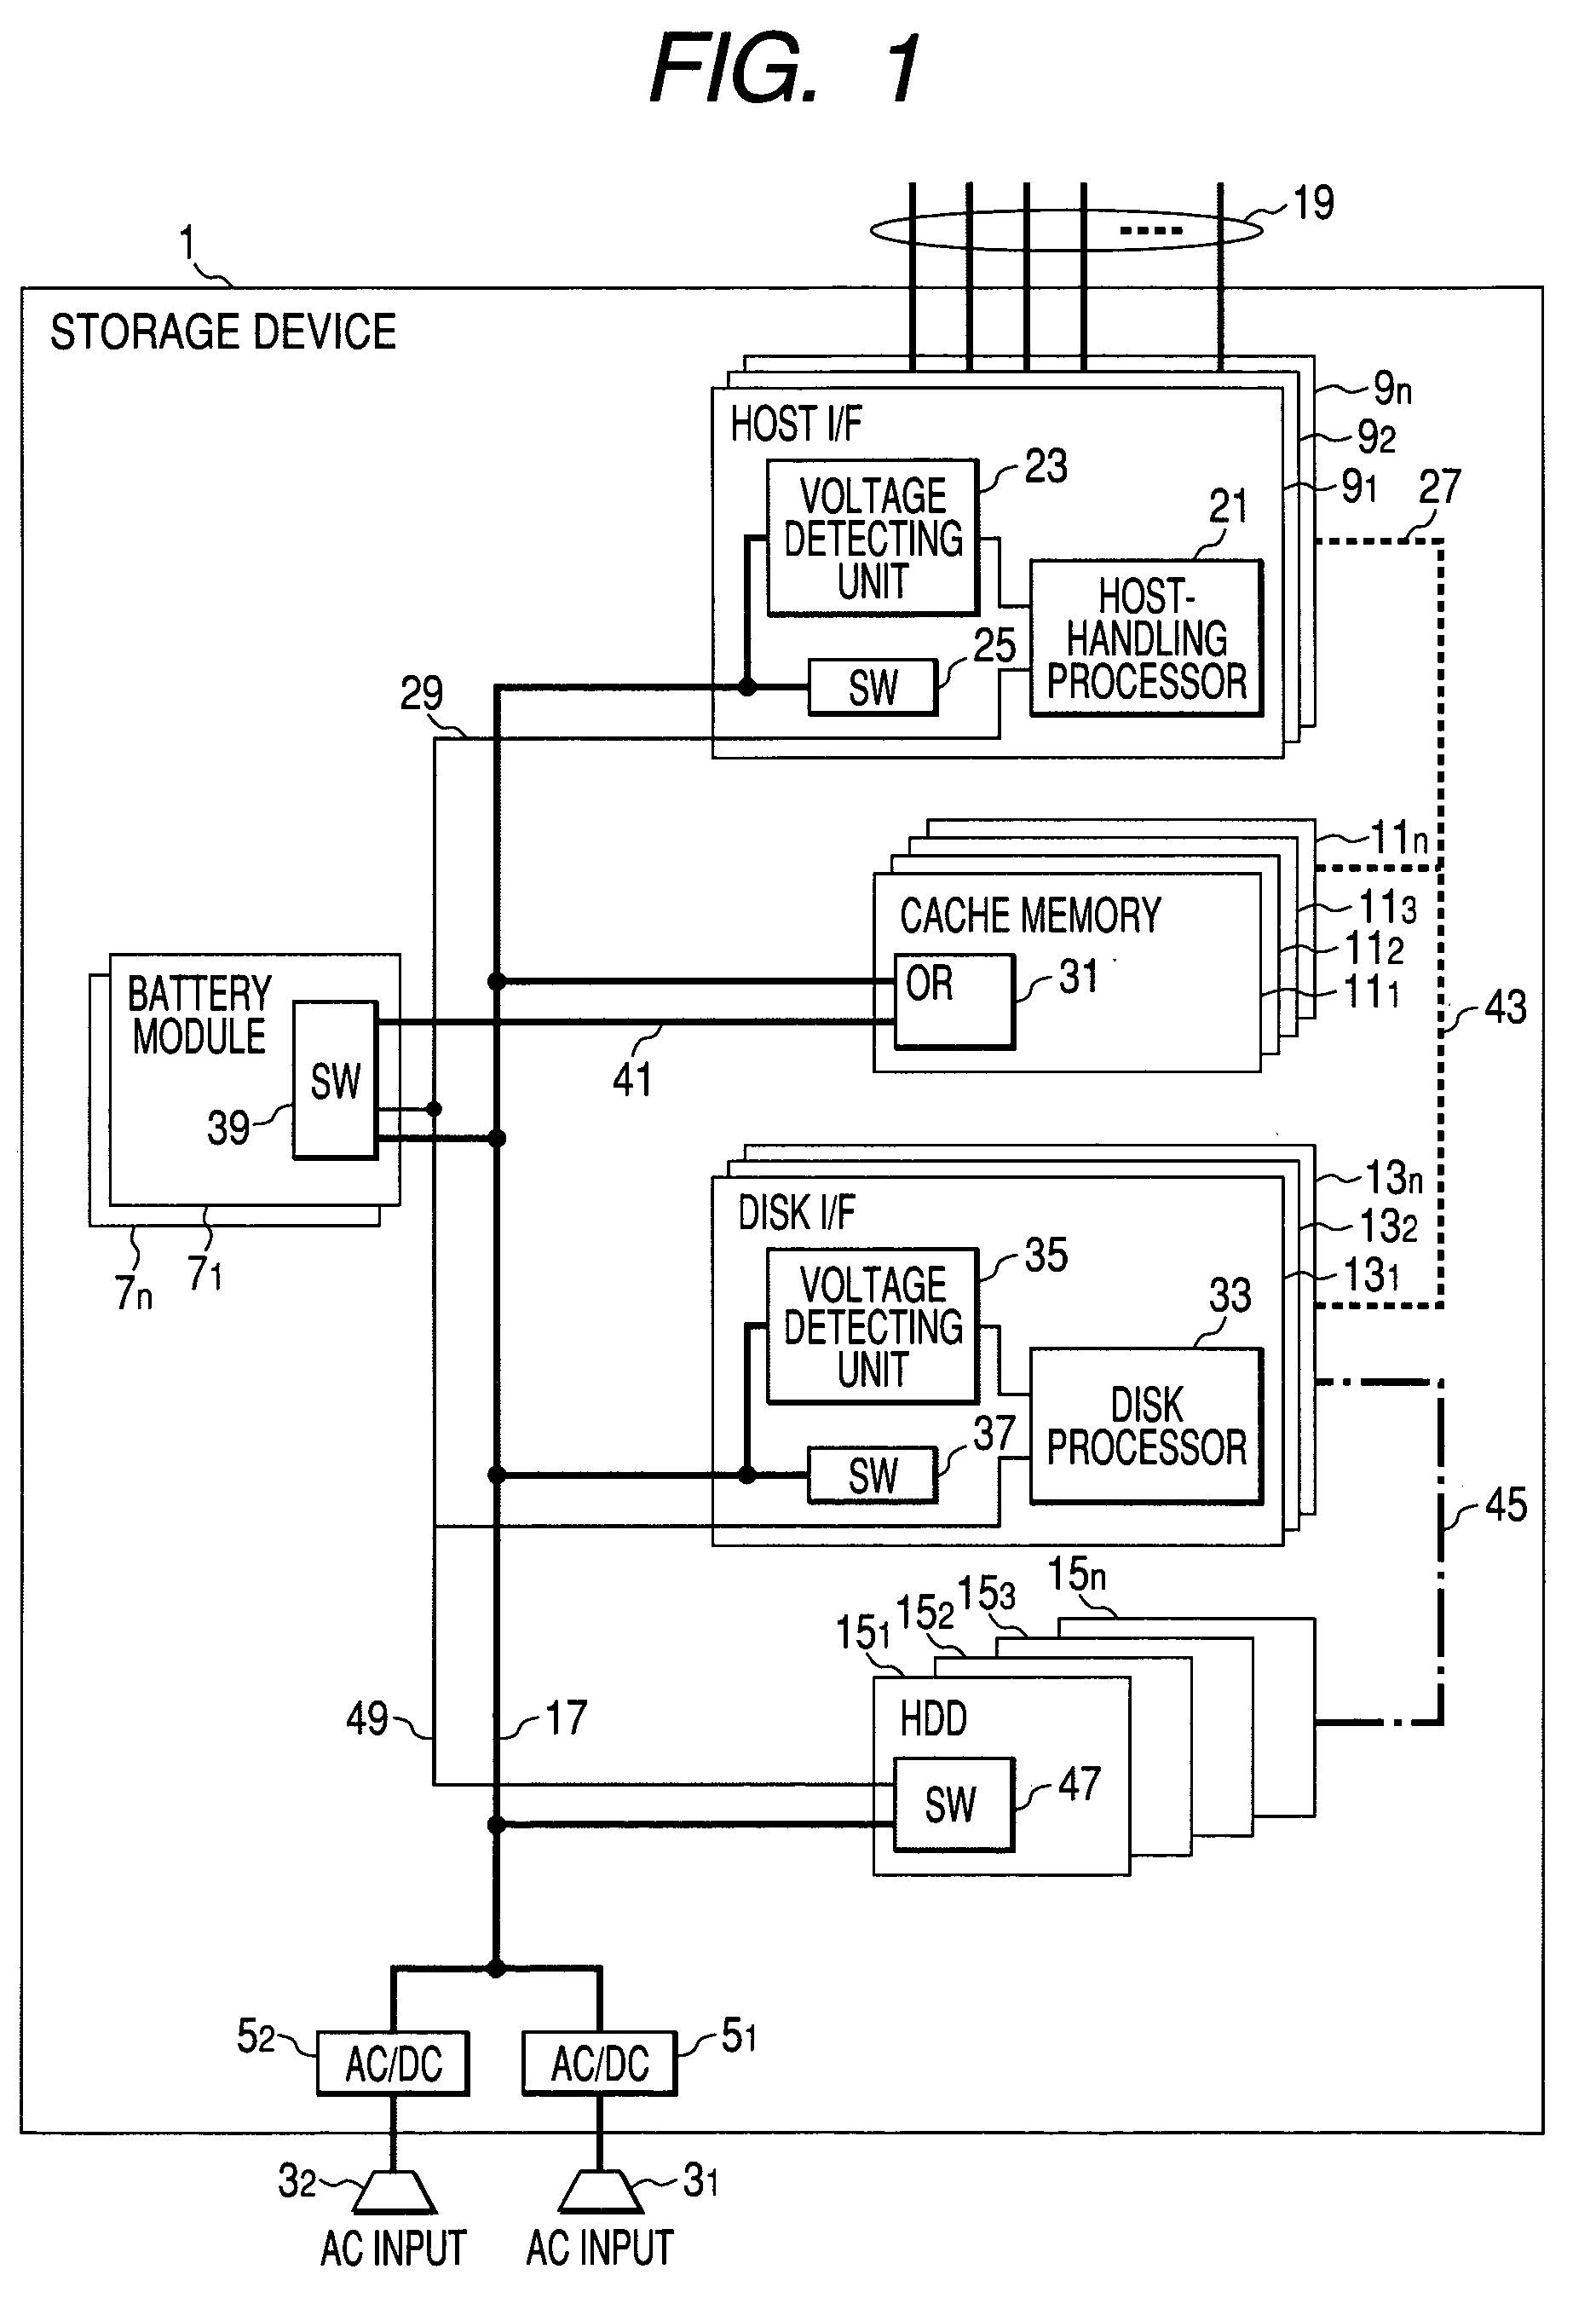 Backup power supply device for a storage device